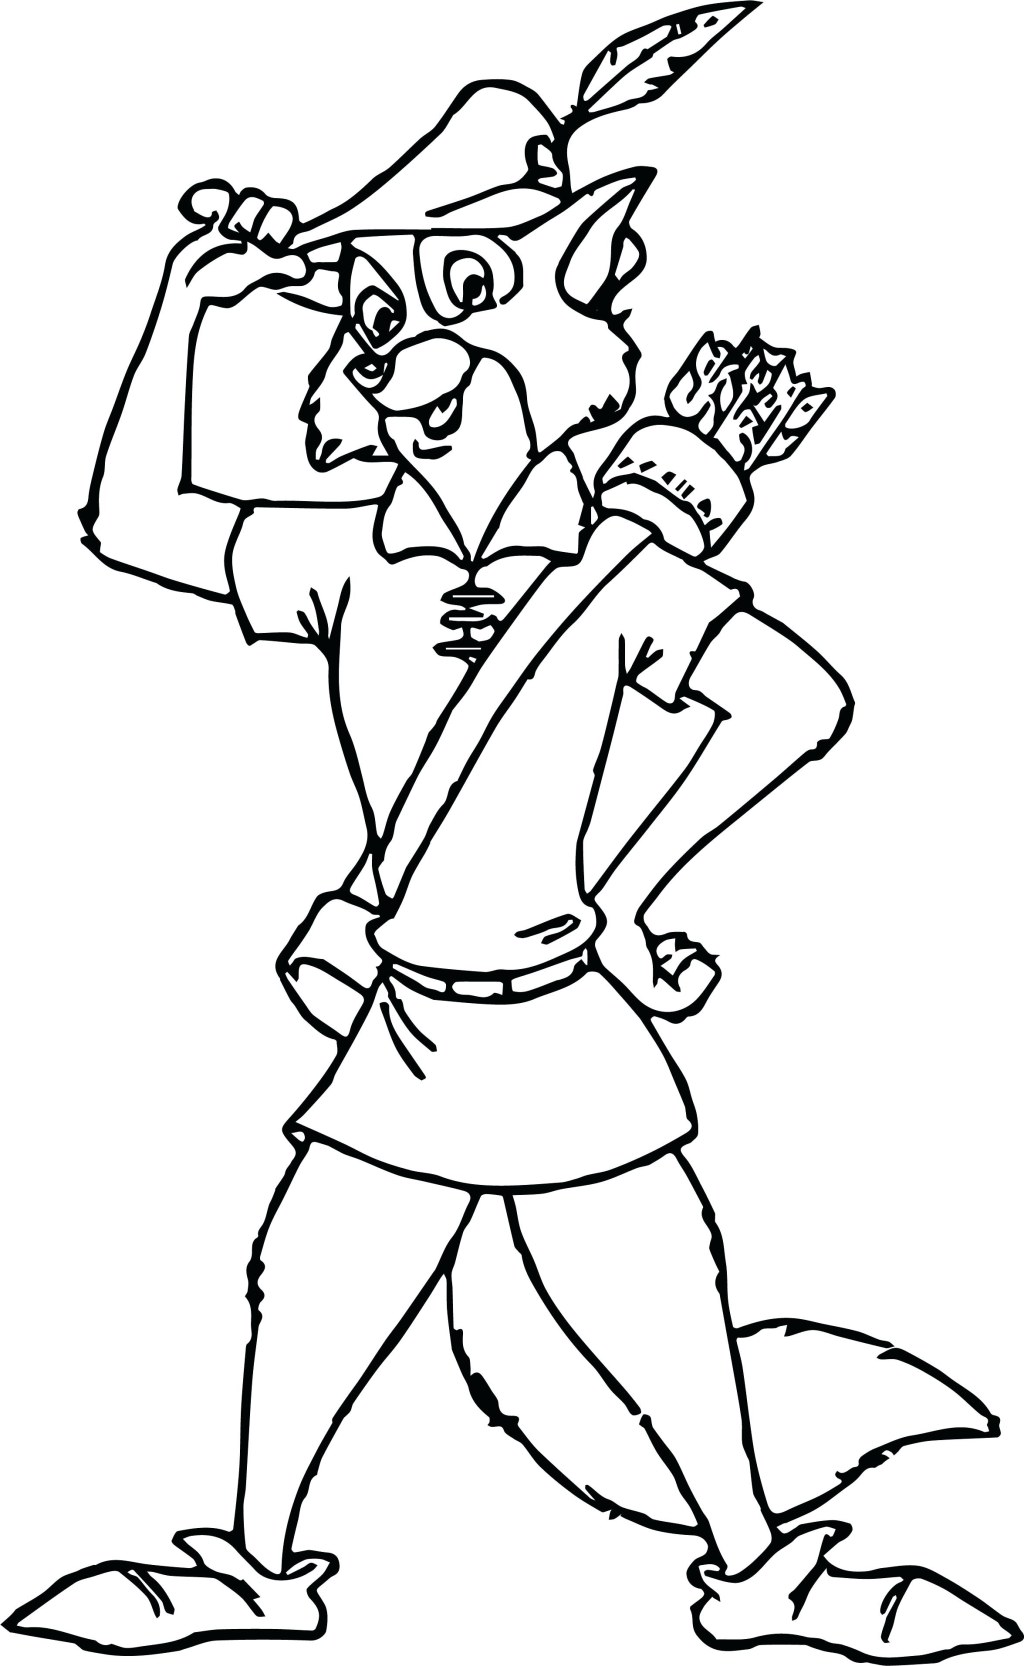 Picture of: Robin Hood Coloring Pages – Best Coloring Pages For Kids